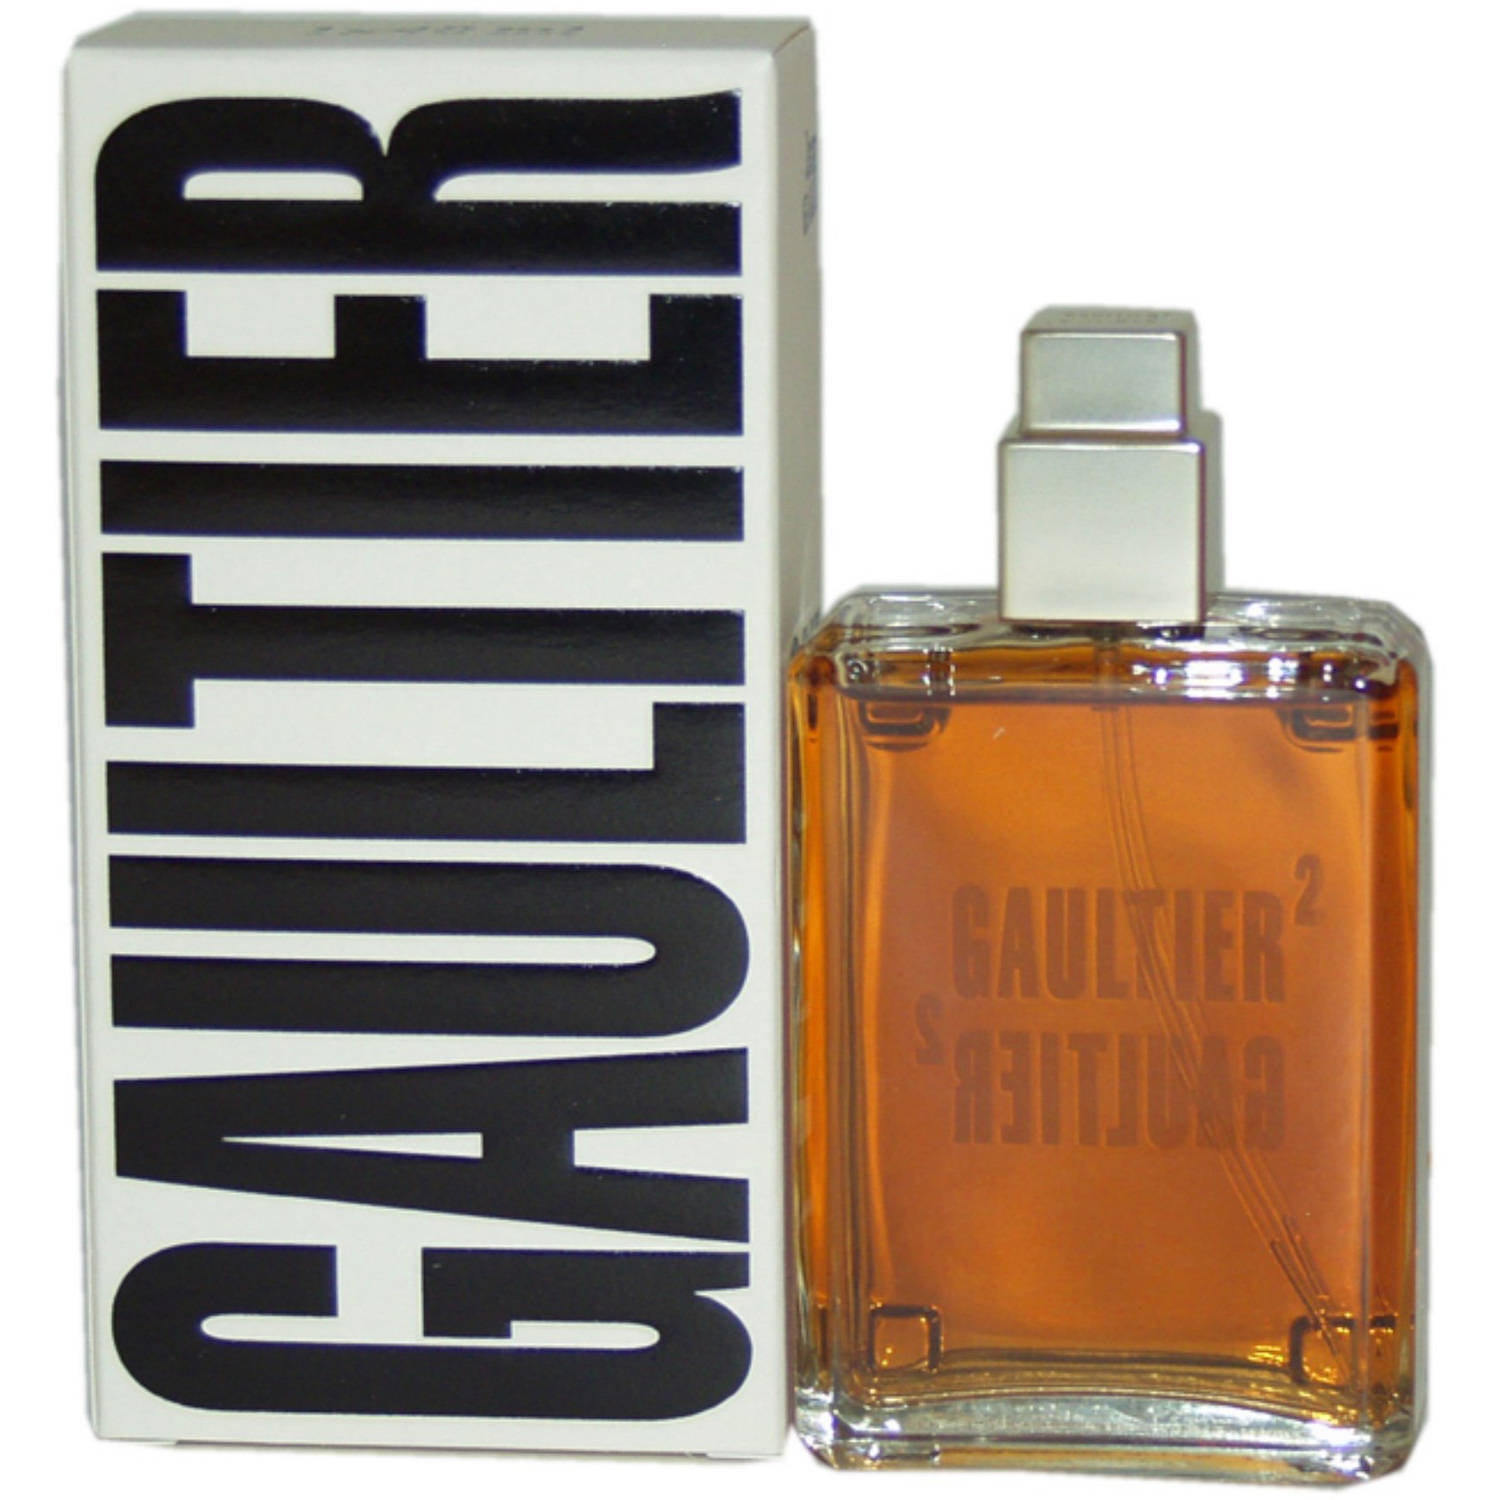 Indflydelse Hearty angivet Gaultier 2 by Jean Paul Gaultier for Women, 1.3 oz - Walmart.com